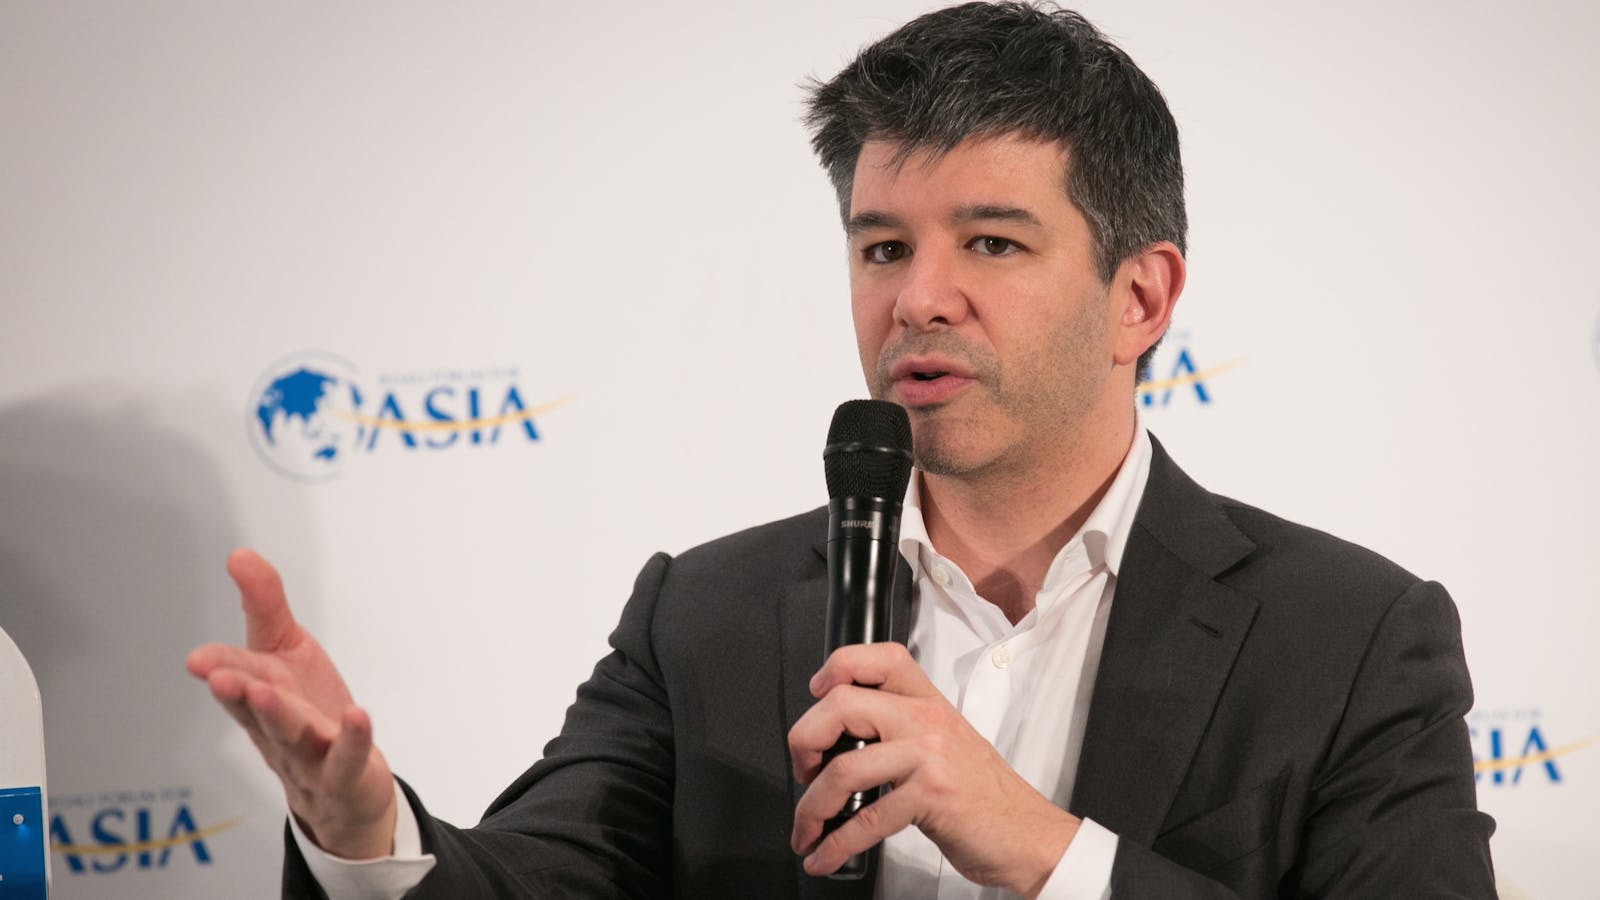 Travis Kalanick. Photo by Boao Forum for Asia.